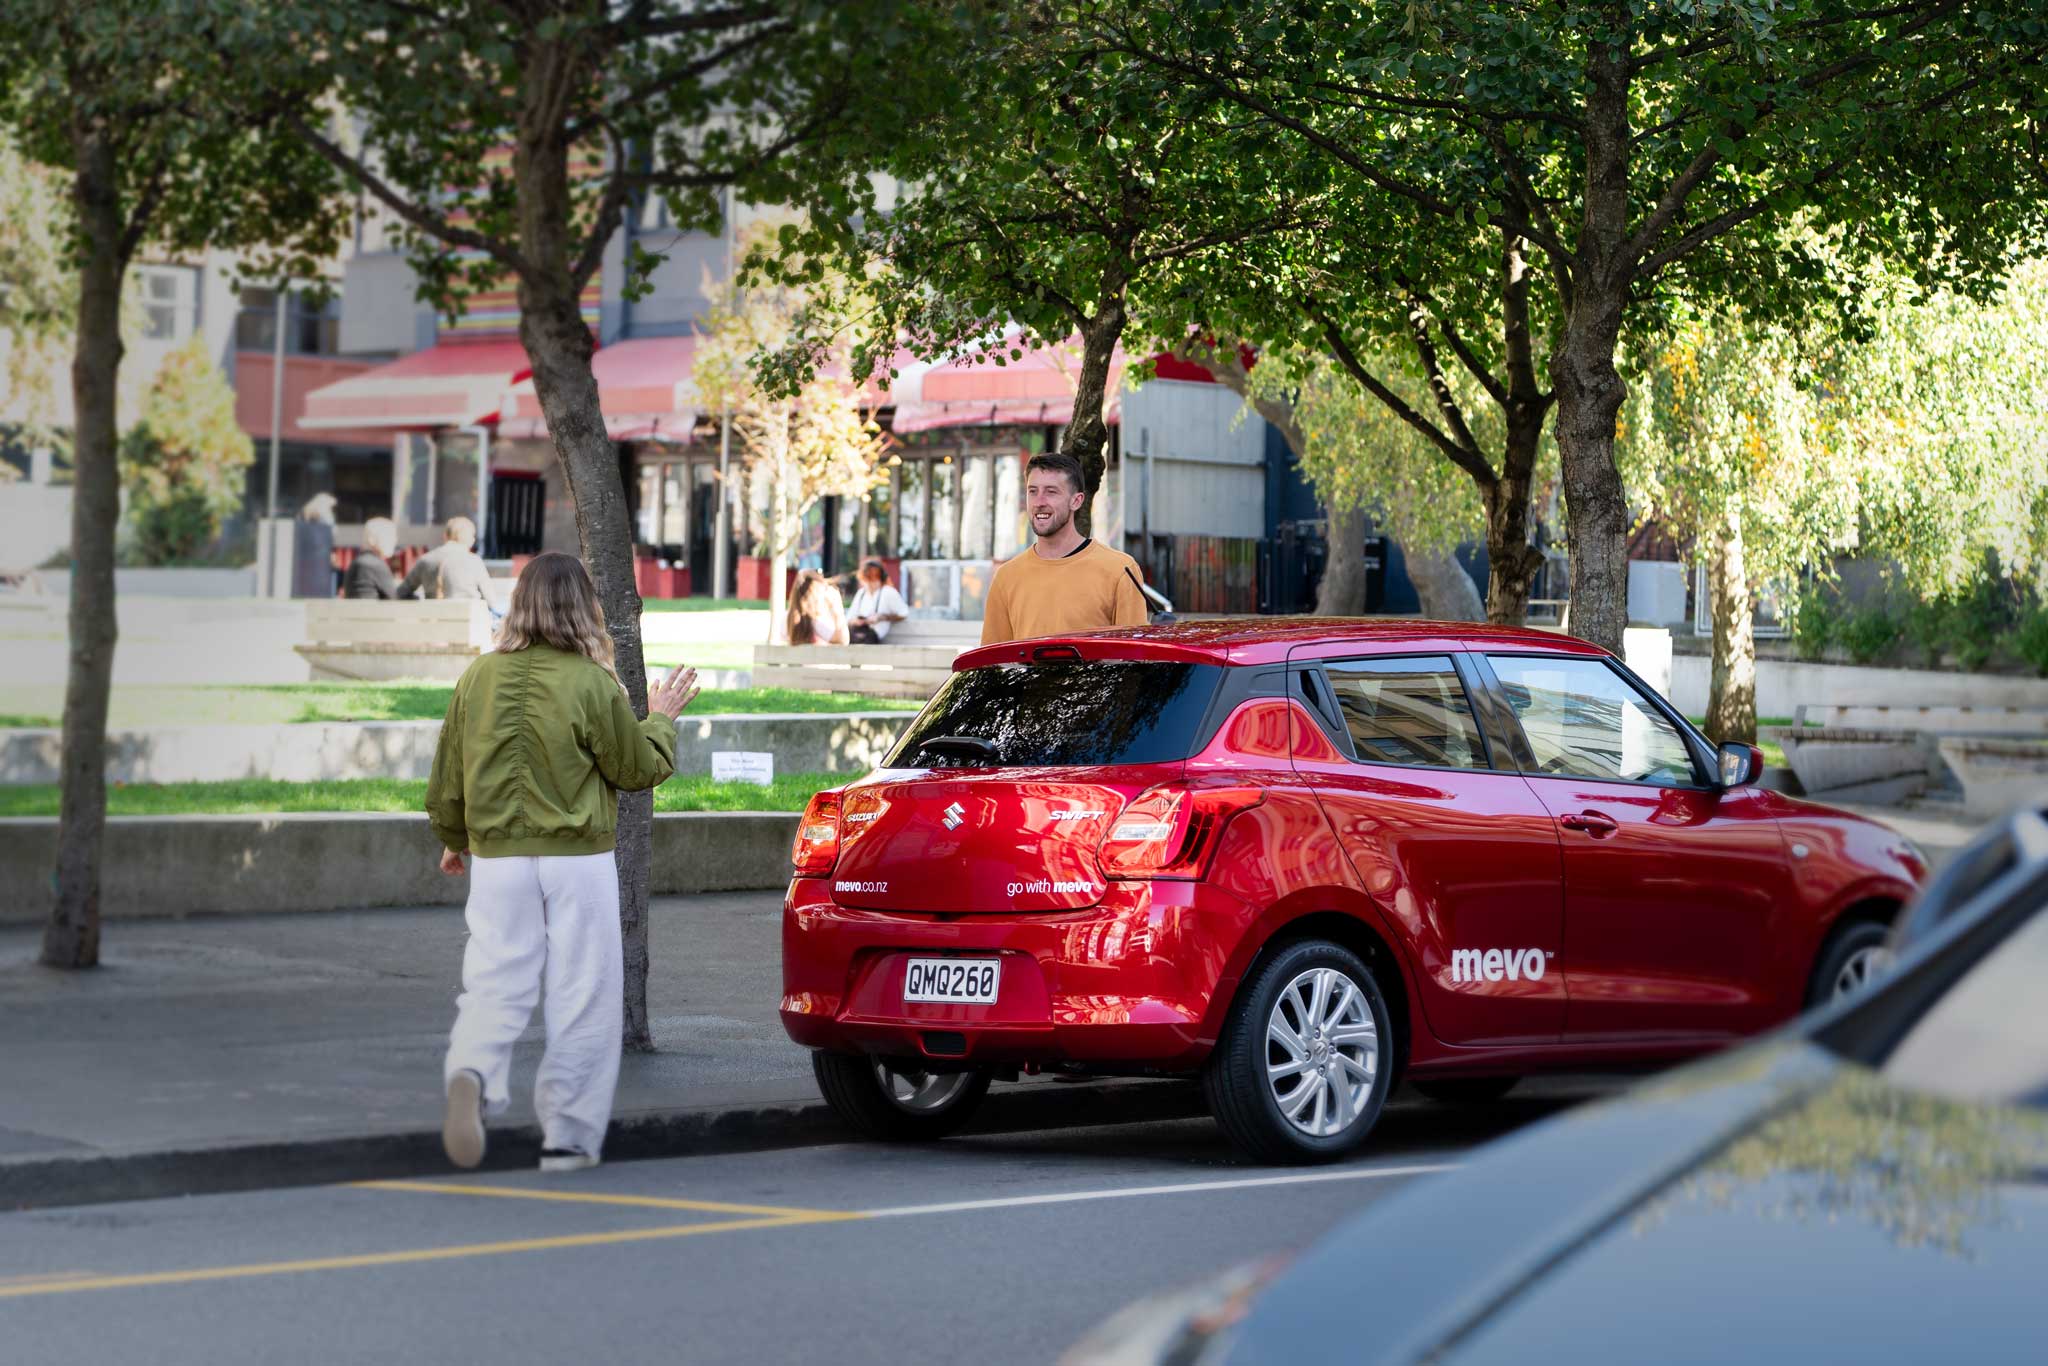 People on a city street with a Mevo Suzuki Swift in the foreground